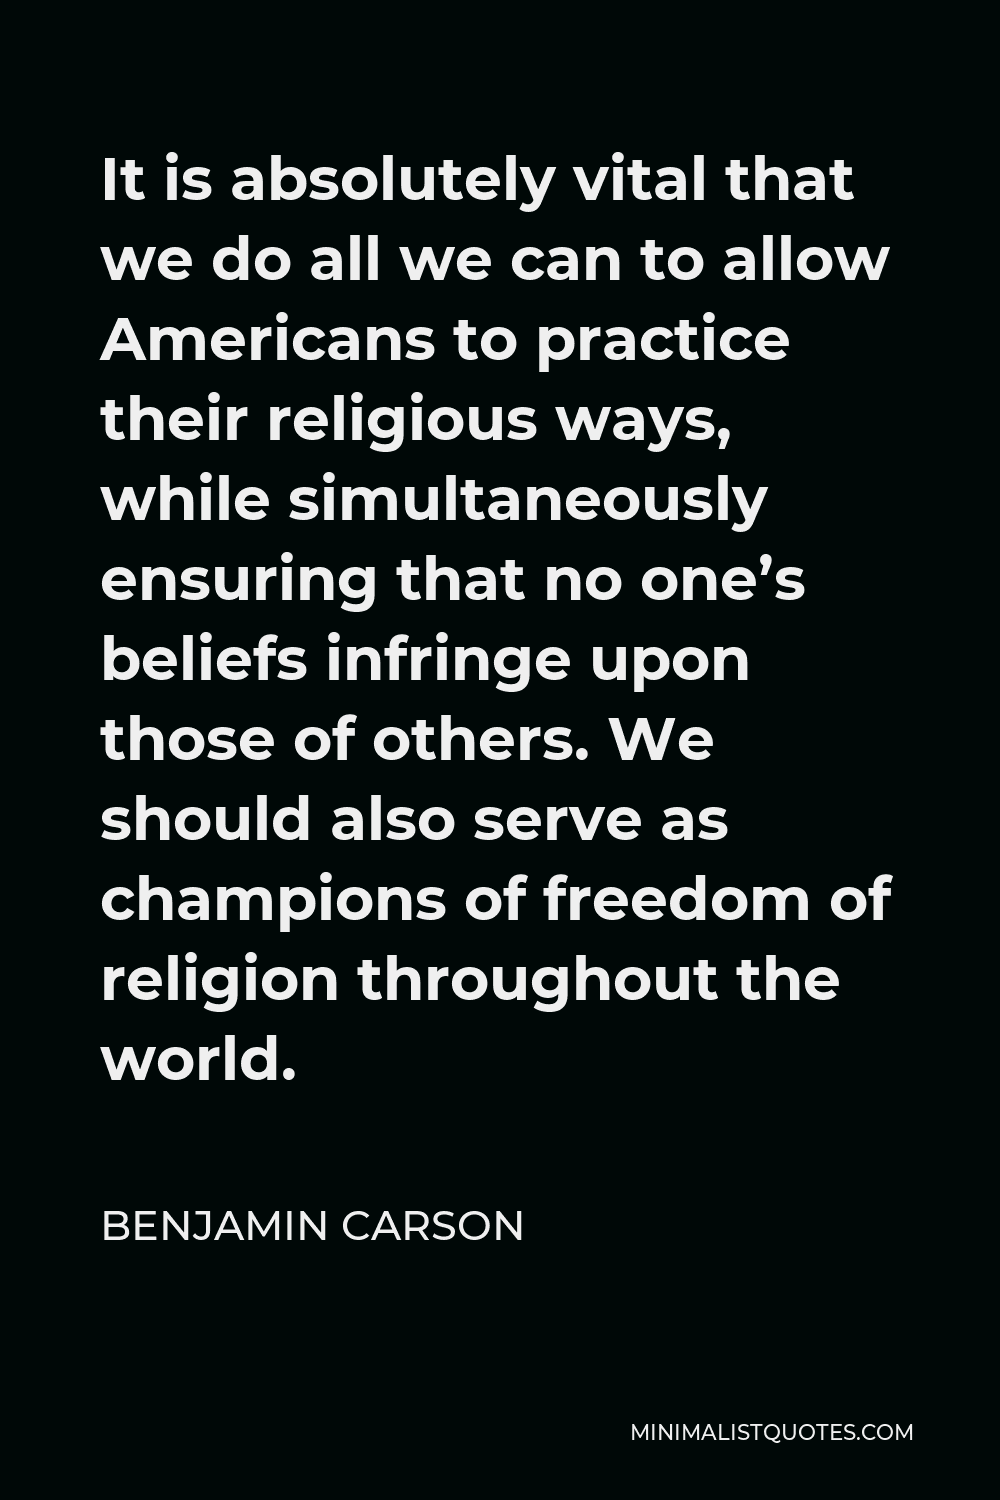 Benjamin Carson Quote - It is absolutely vital that we do all we can to allow Americans to practice their religious ways, while simultaneously ensuring that no one’s beliefs infringe upon those of others. We should also serve as champions of freedom of religion throughout the world.